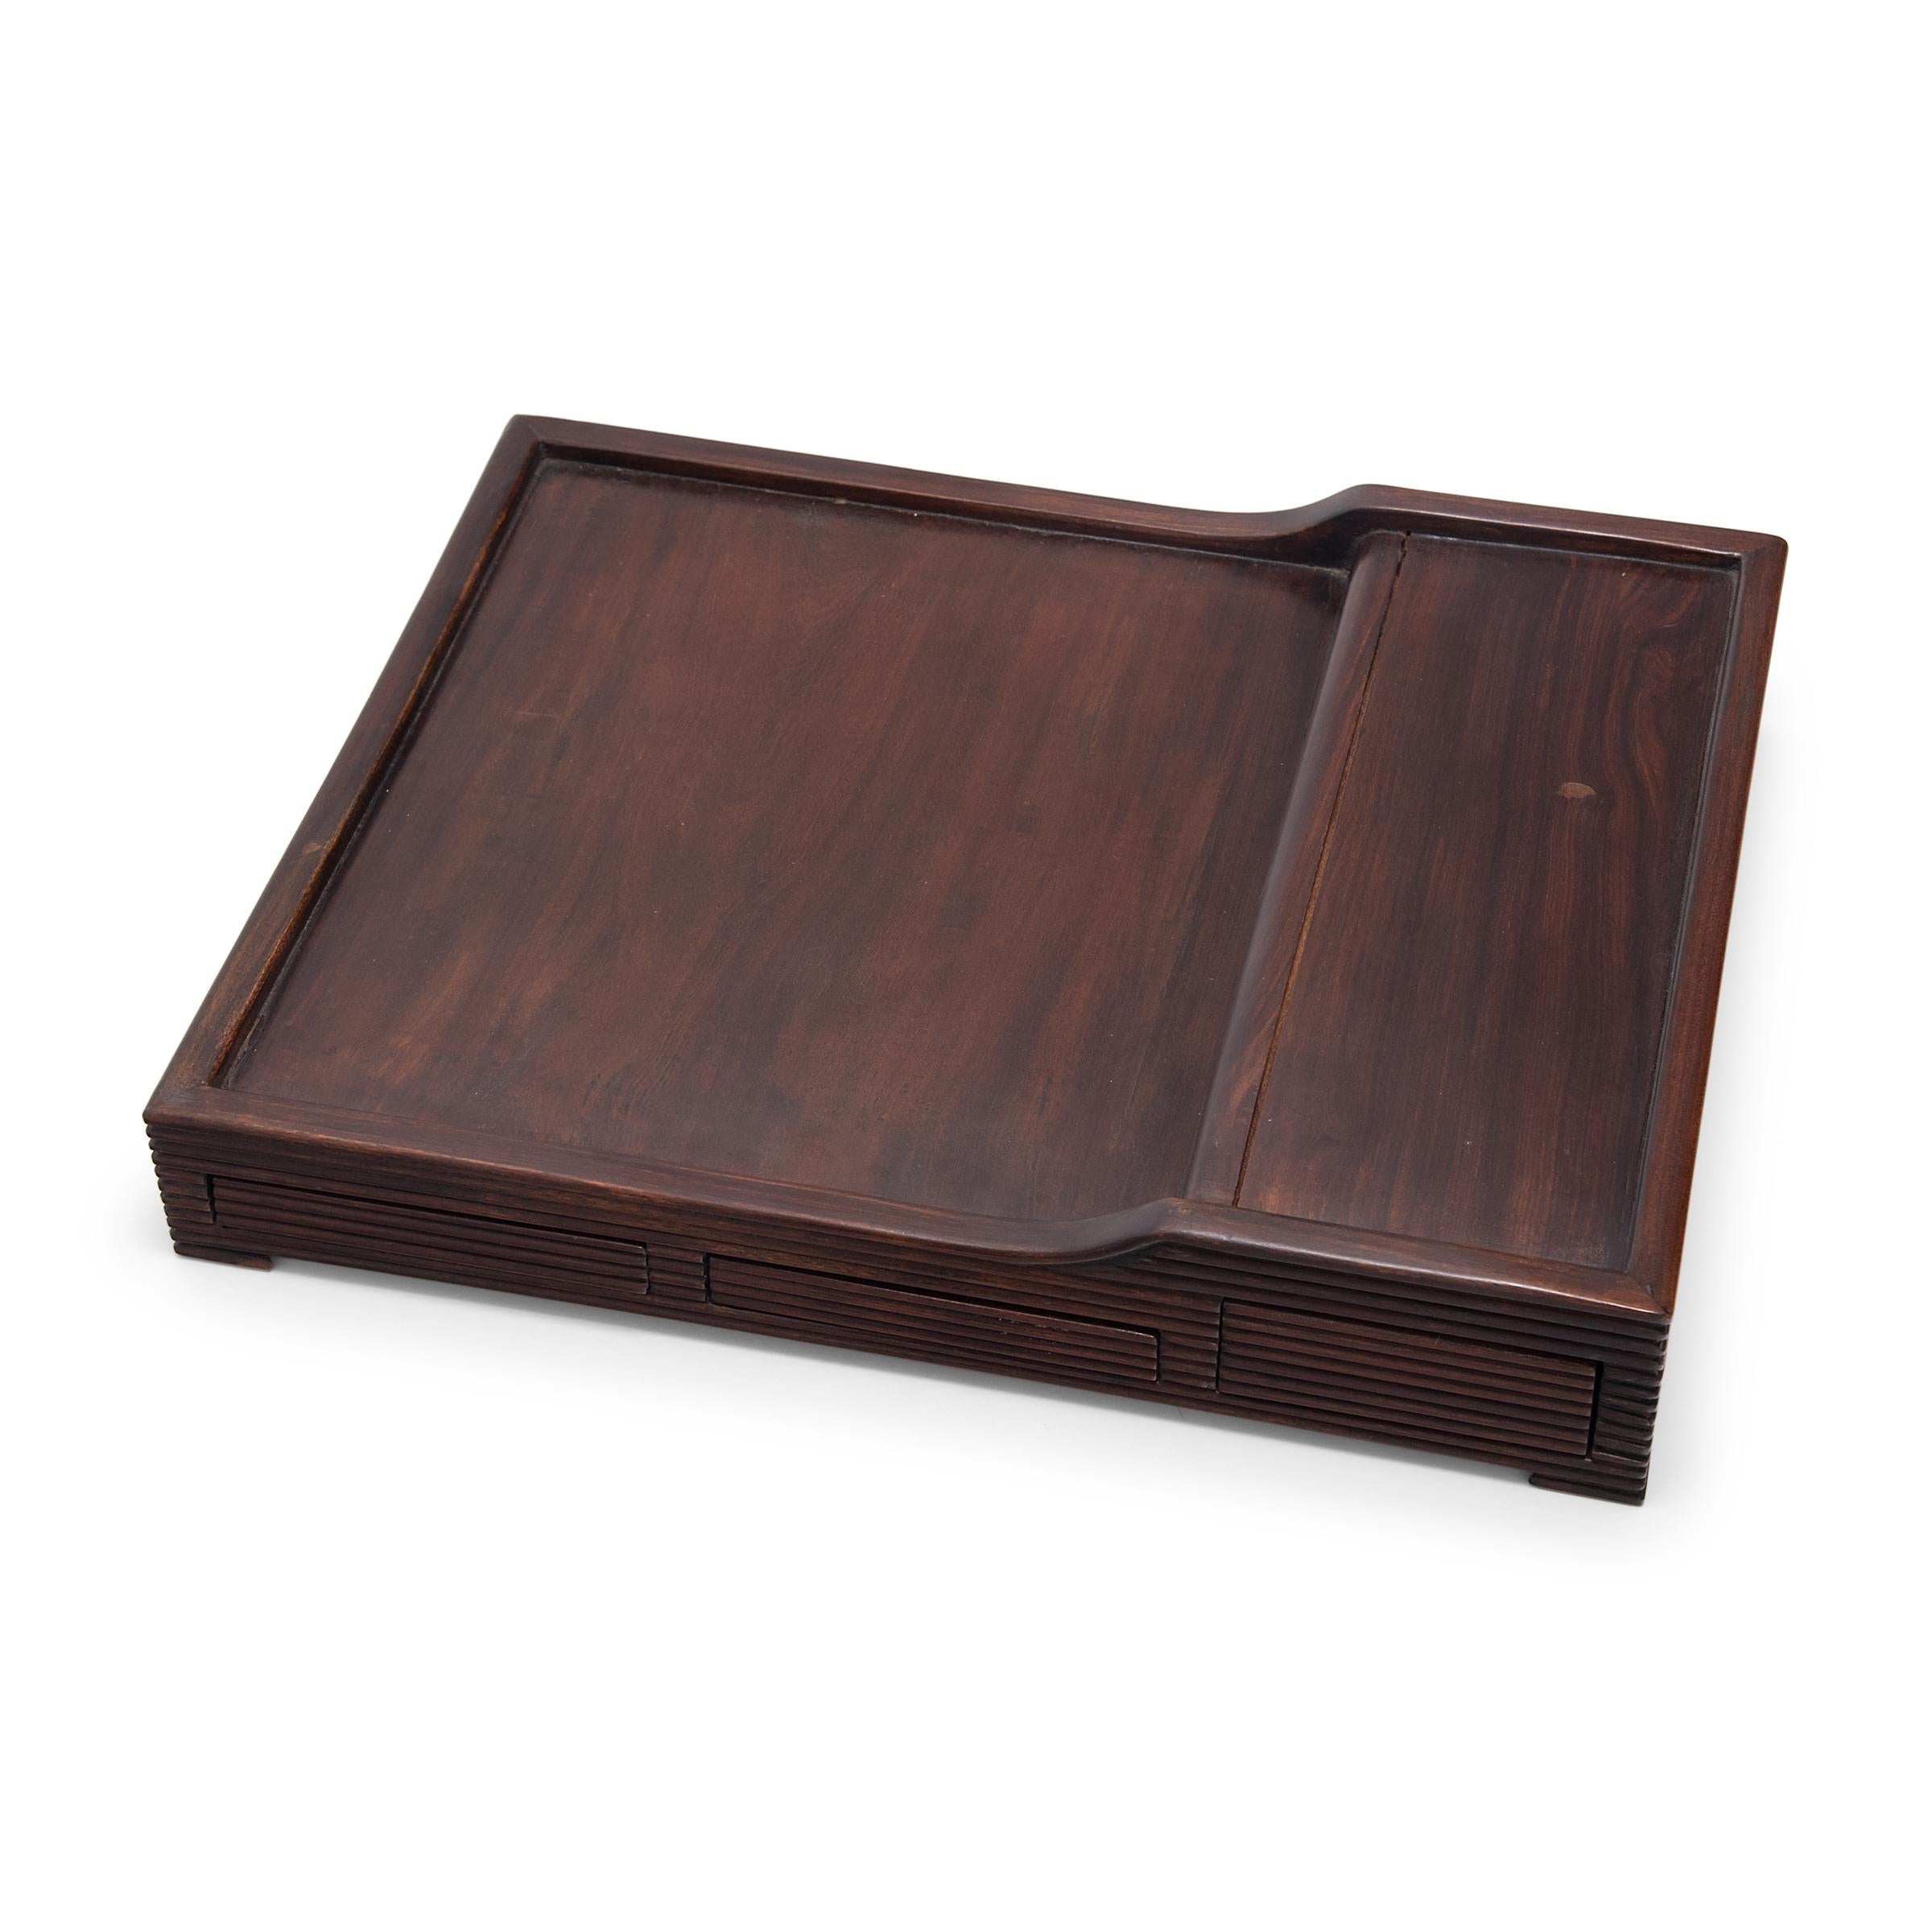 Dated to the late 19th century, this elegant tea tray charms with clean lines, fine materials, and balanced proportions. Used as a surface for preparing and serving tea, the tray has a tiered top and hand-carved ridged sides concealing three shallow